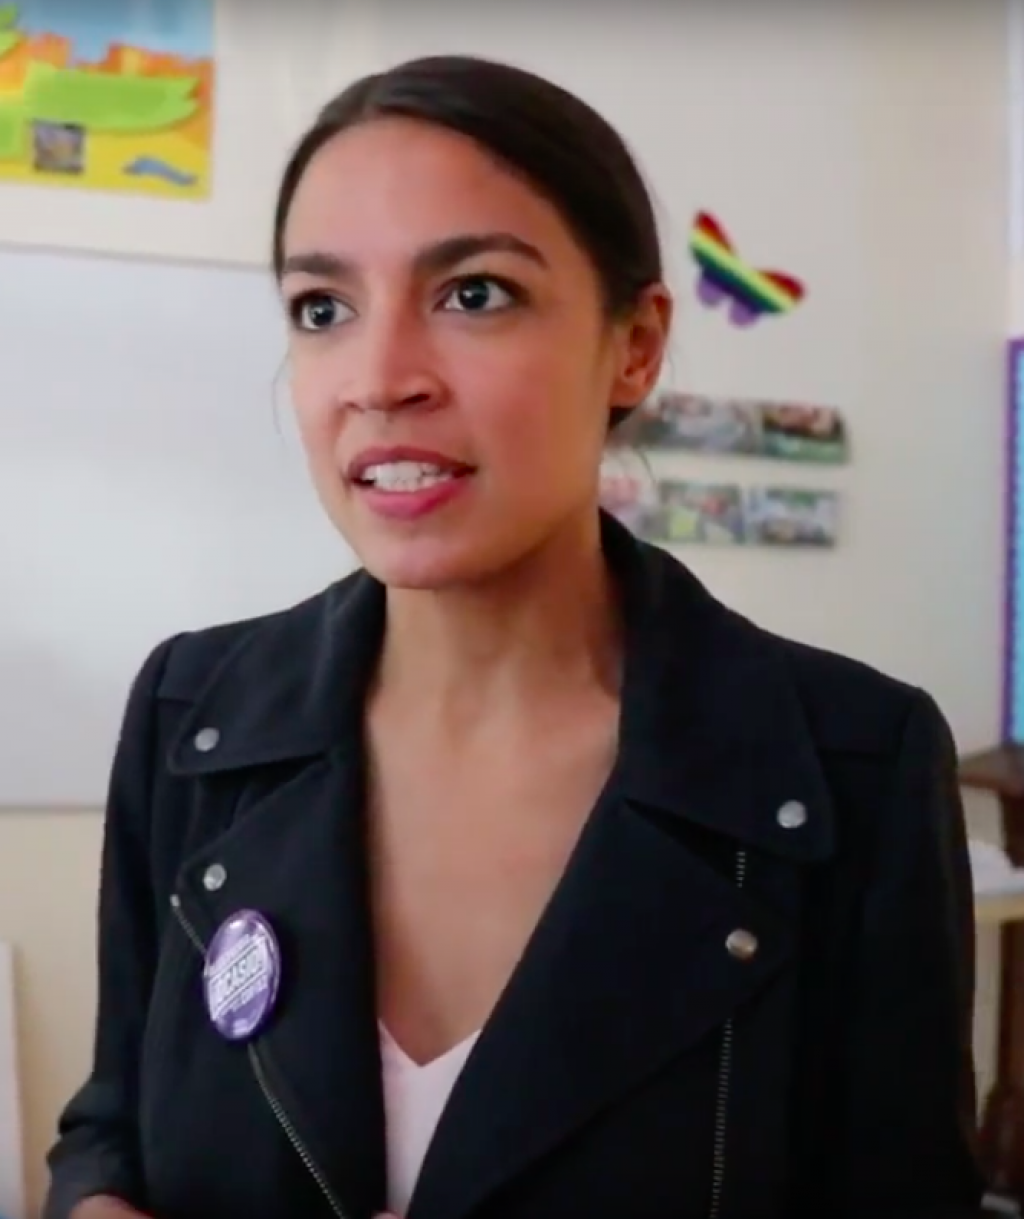 Ocasio-Cortez dancing means nothing, her ideas do